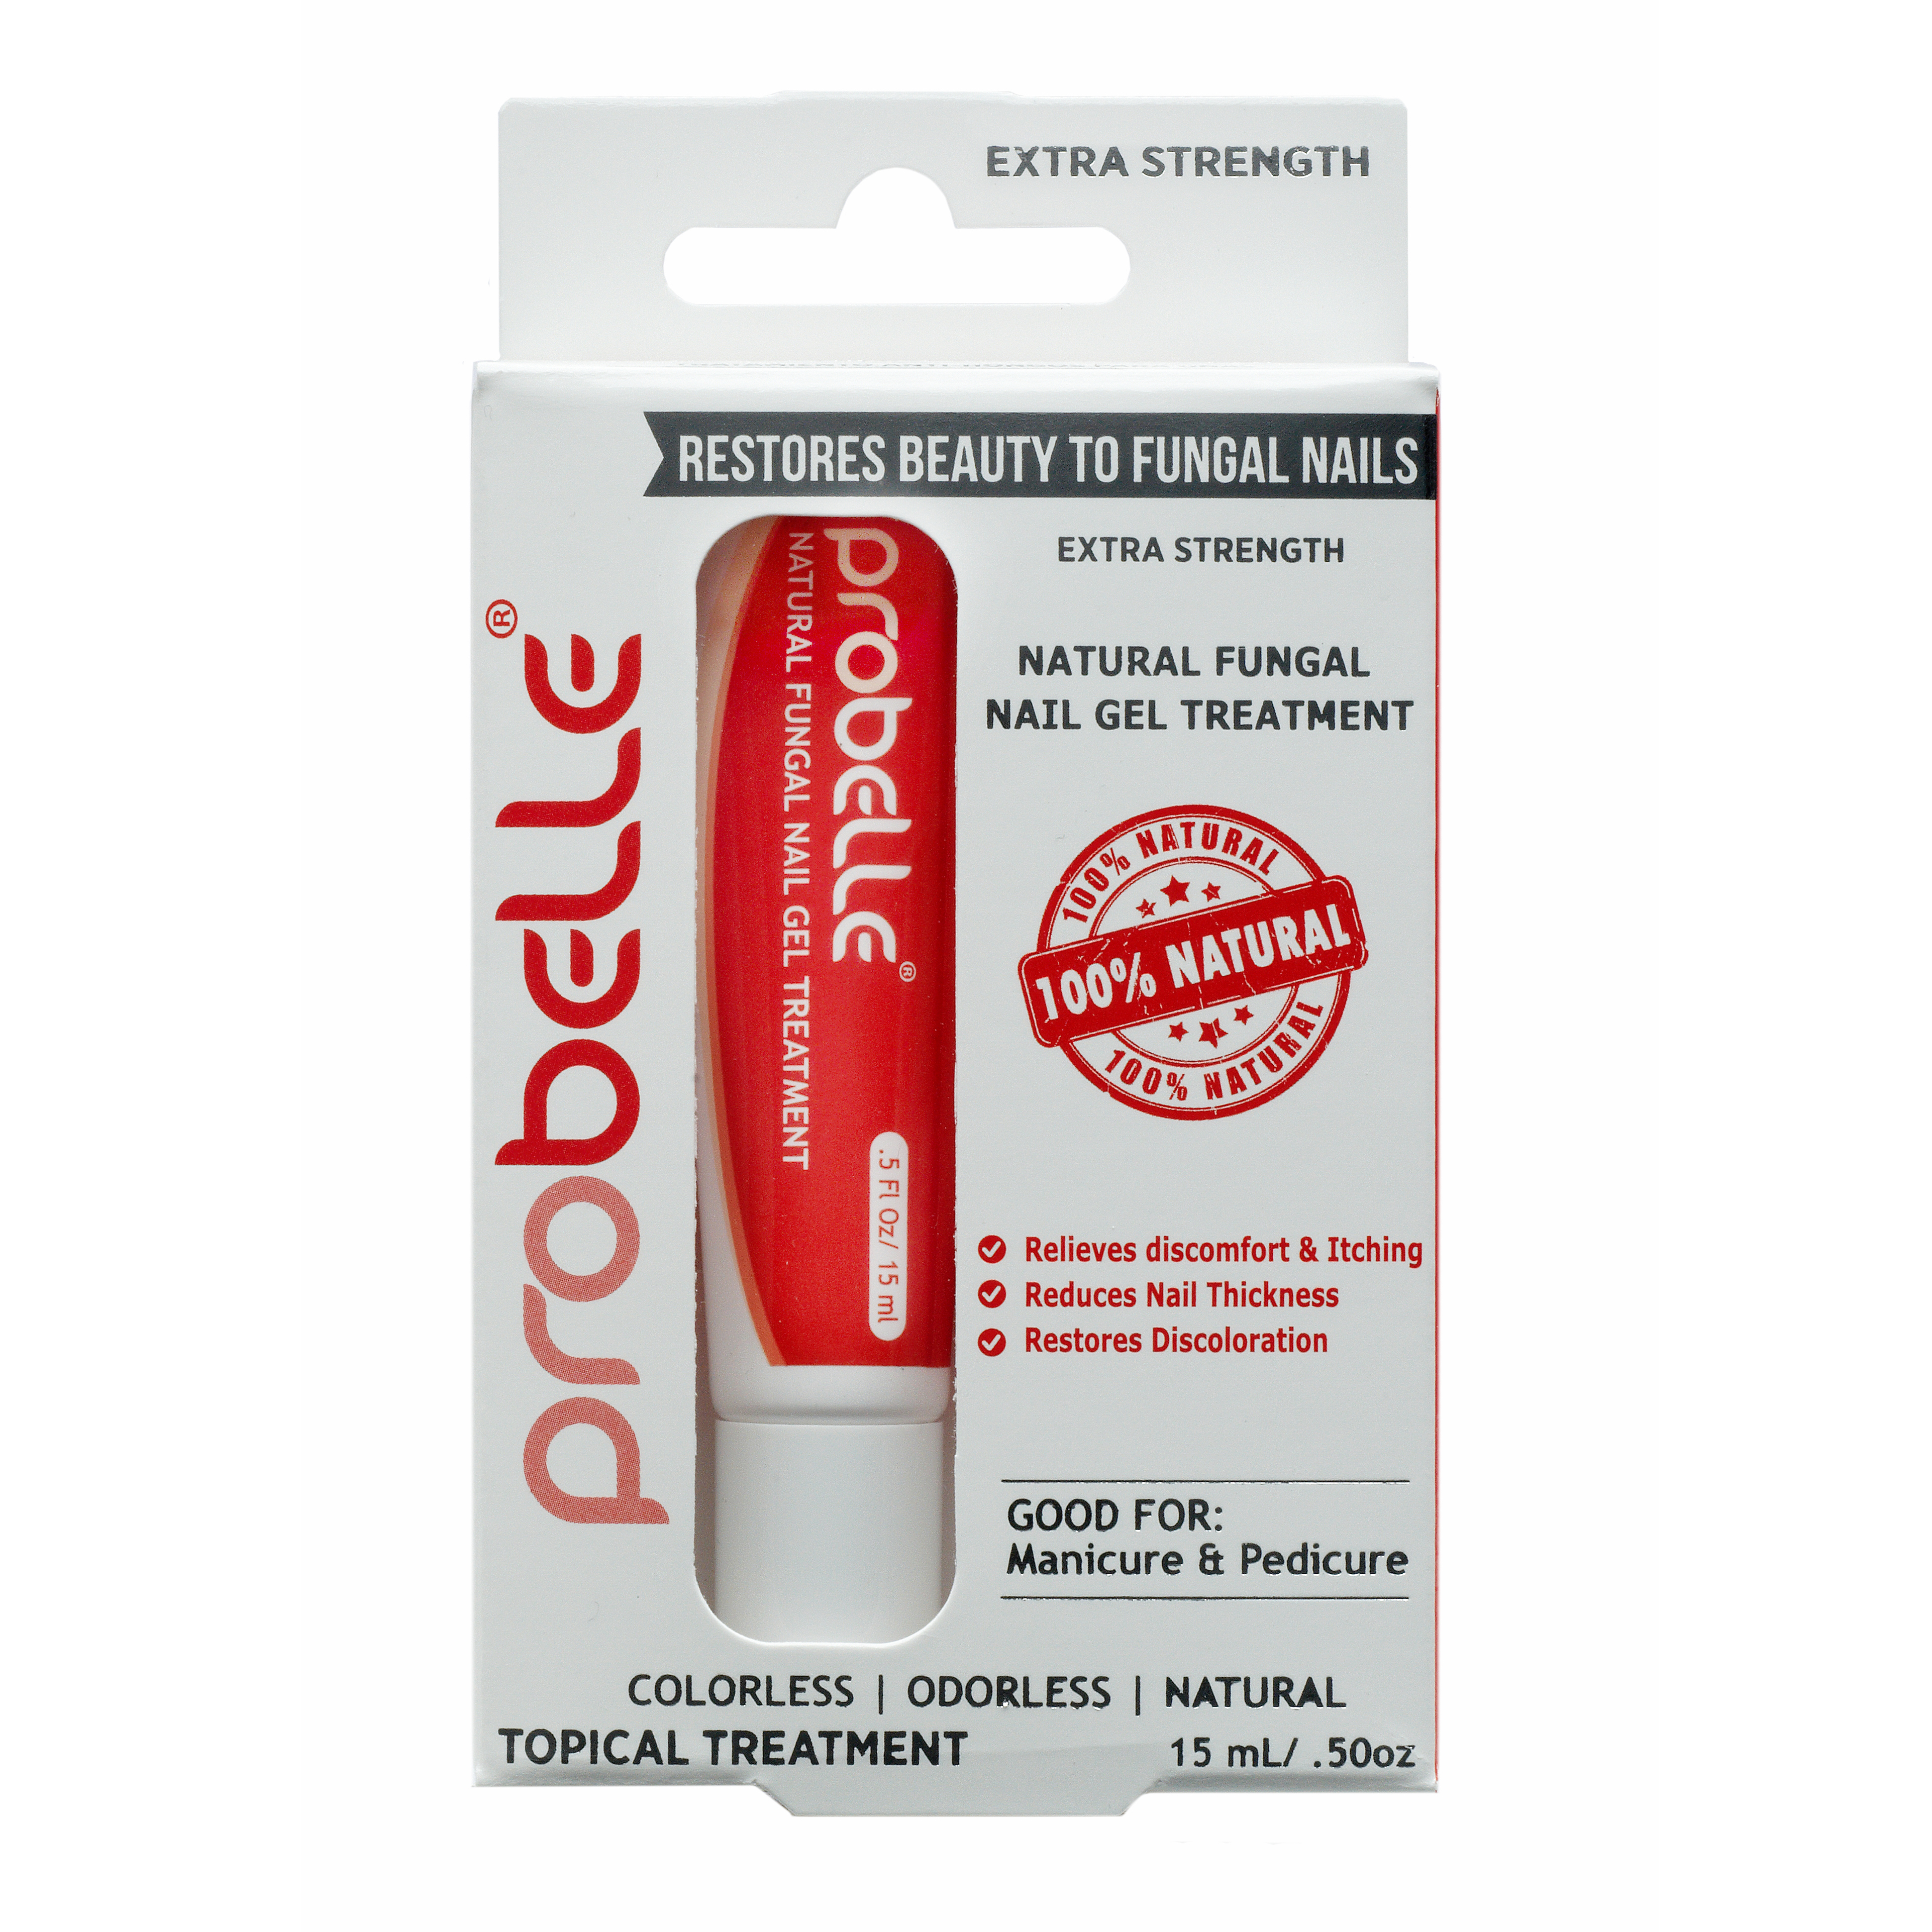 Natural Fungal Nail Gel Treatment - Extra Strength by Probelle